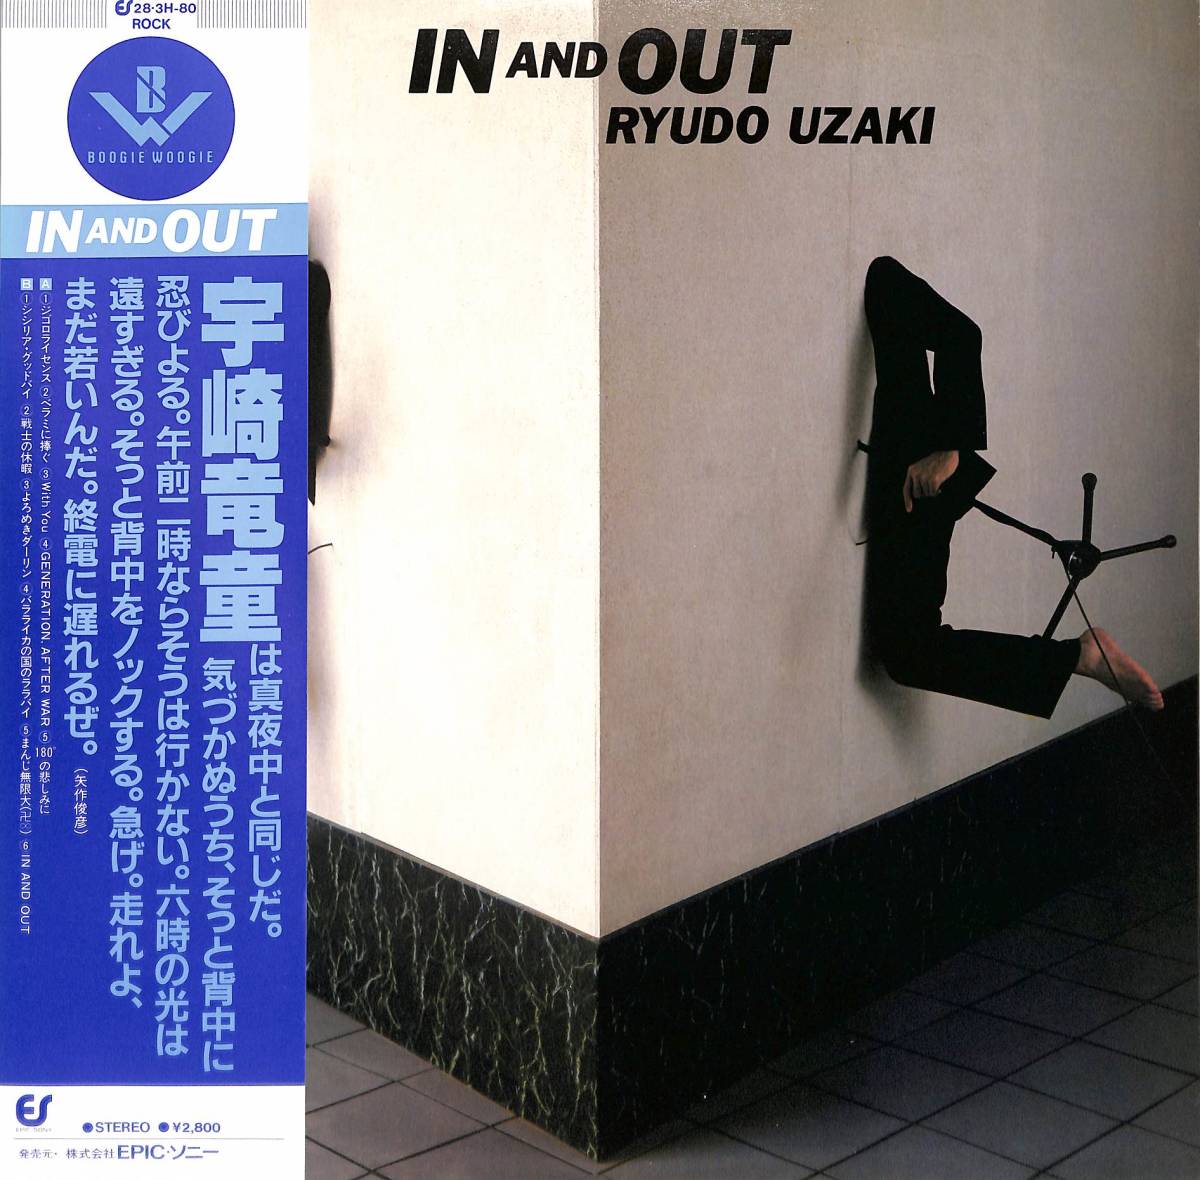 A00551846/LP/宇崎竜童 (竜童組・ダウンタウンブギウギバンド)「In And Out (1983年・28-3H-80)」_画像1